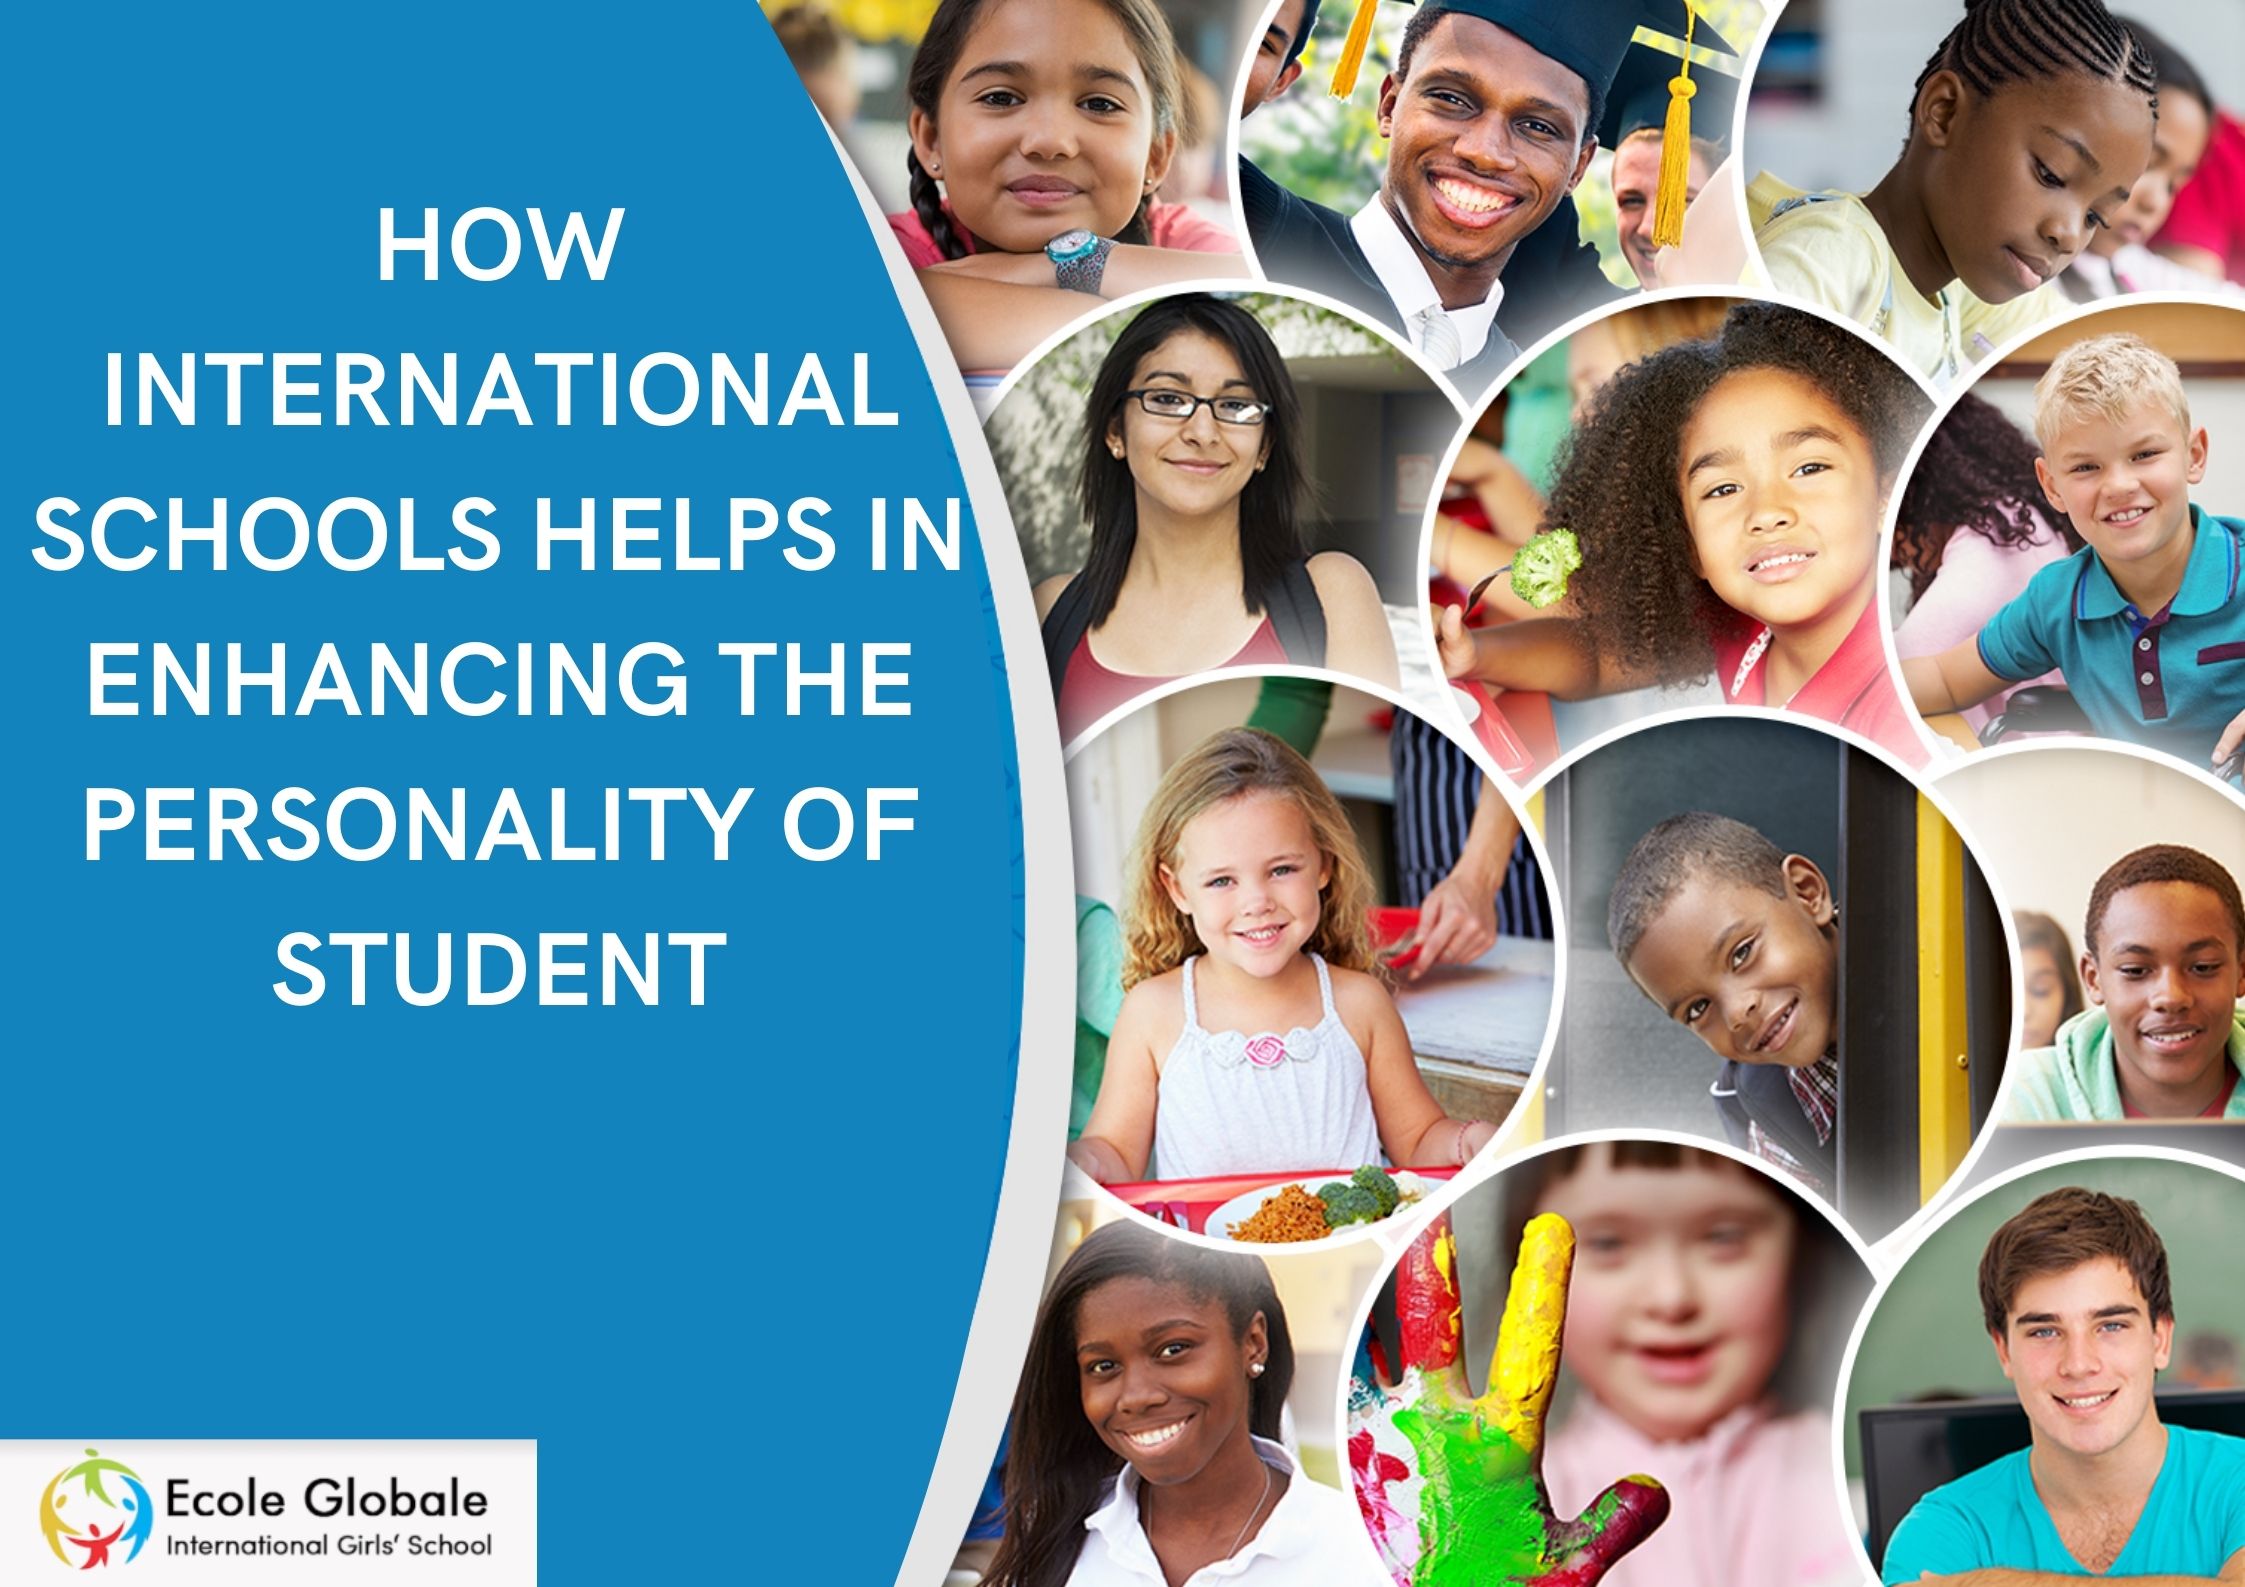 HOW INTERNATIONAL SCHOOLS HELPS IN ENHANCING THE PERSONALITY OF STUDENT